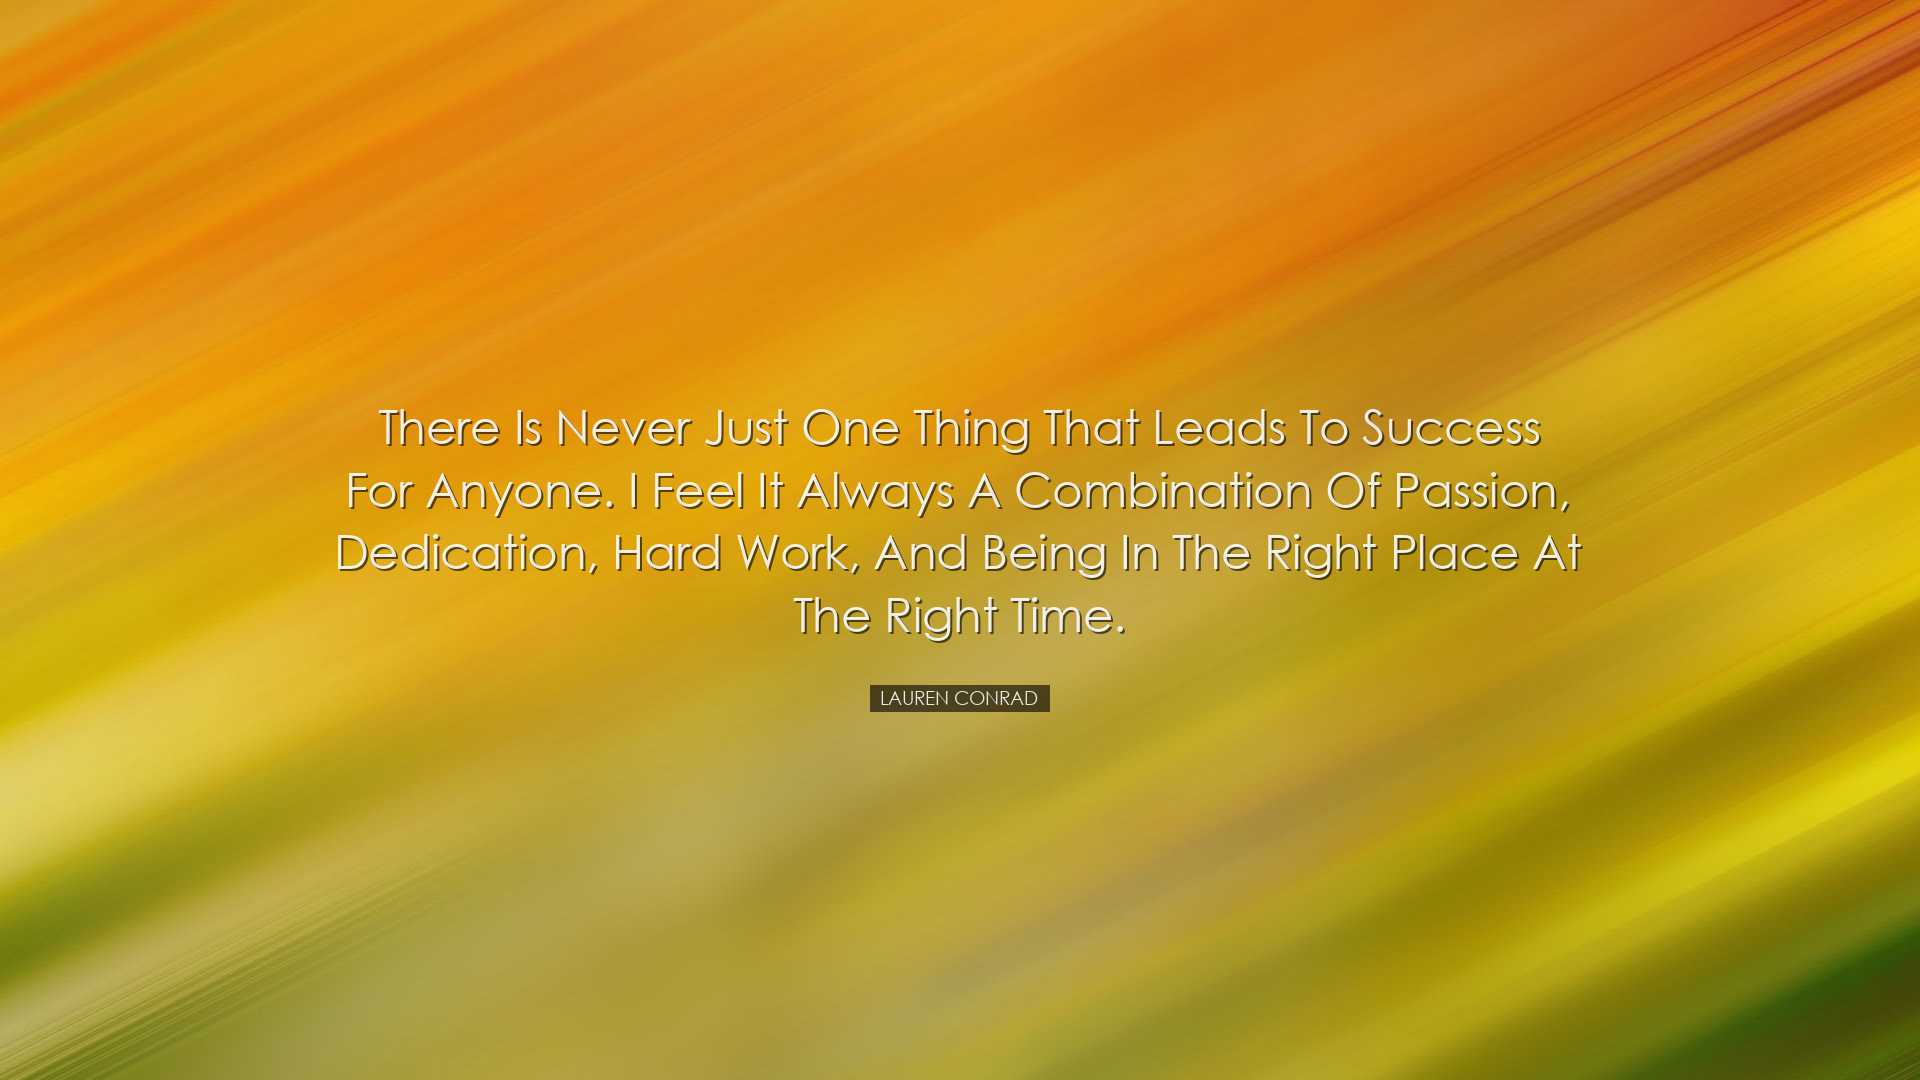 There is never just one thing that leads to success for anyone. I